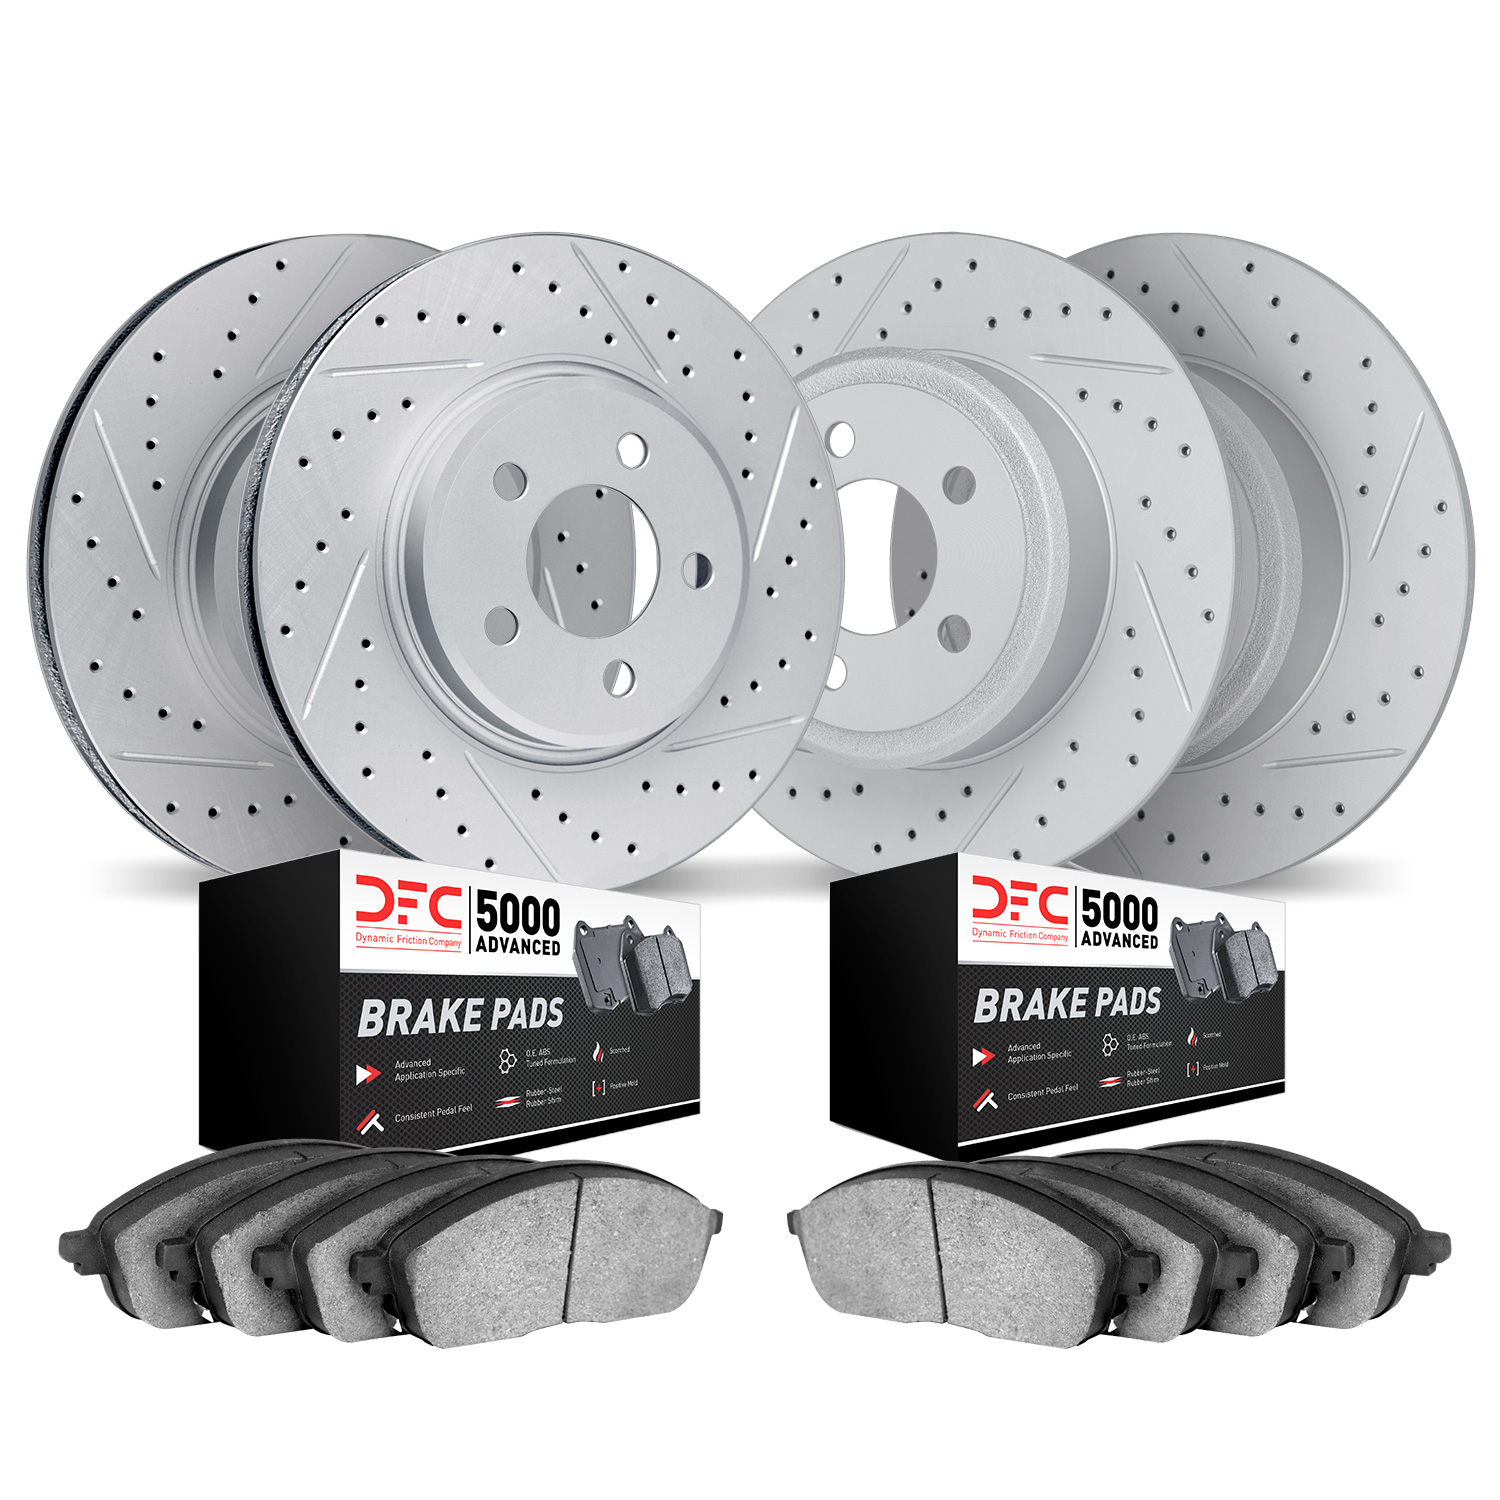 2504-76086 Geoperformance Drilled/Slotted Rotors w/5000 Advanced Brake Pads Kit, 2000-2004 Lexus/Toyota/Scion, Position: Front a